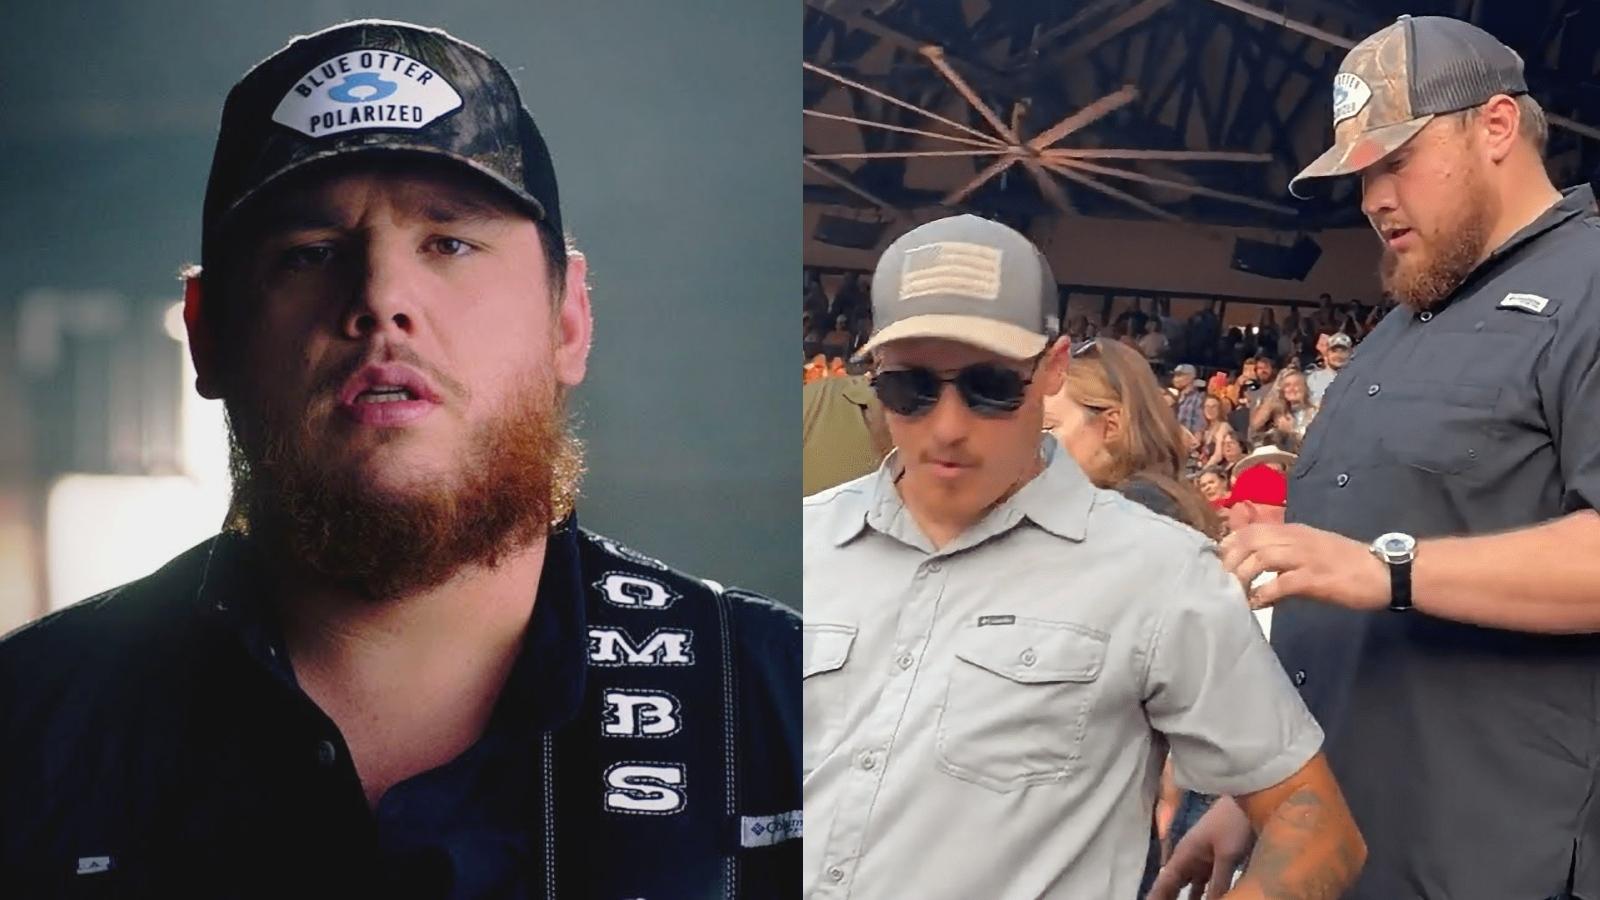 Luke Combs on left side with lookalike at concert on right side